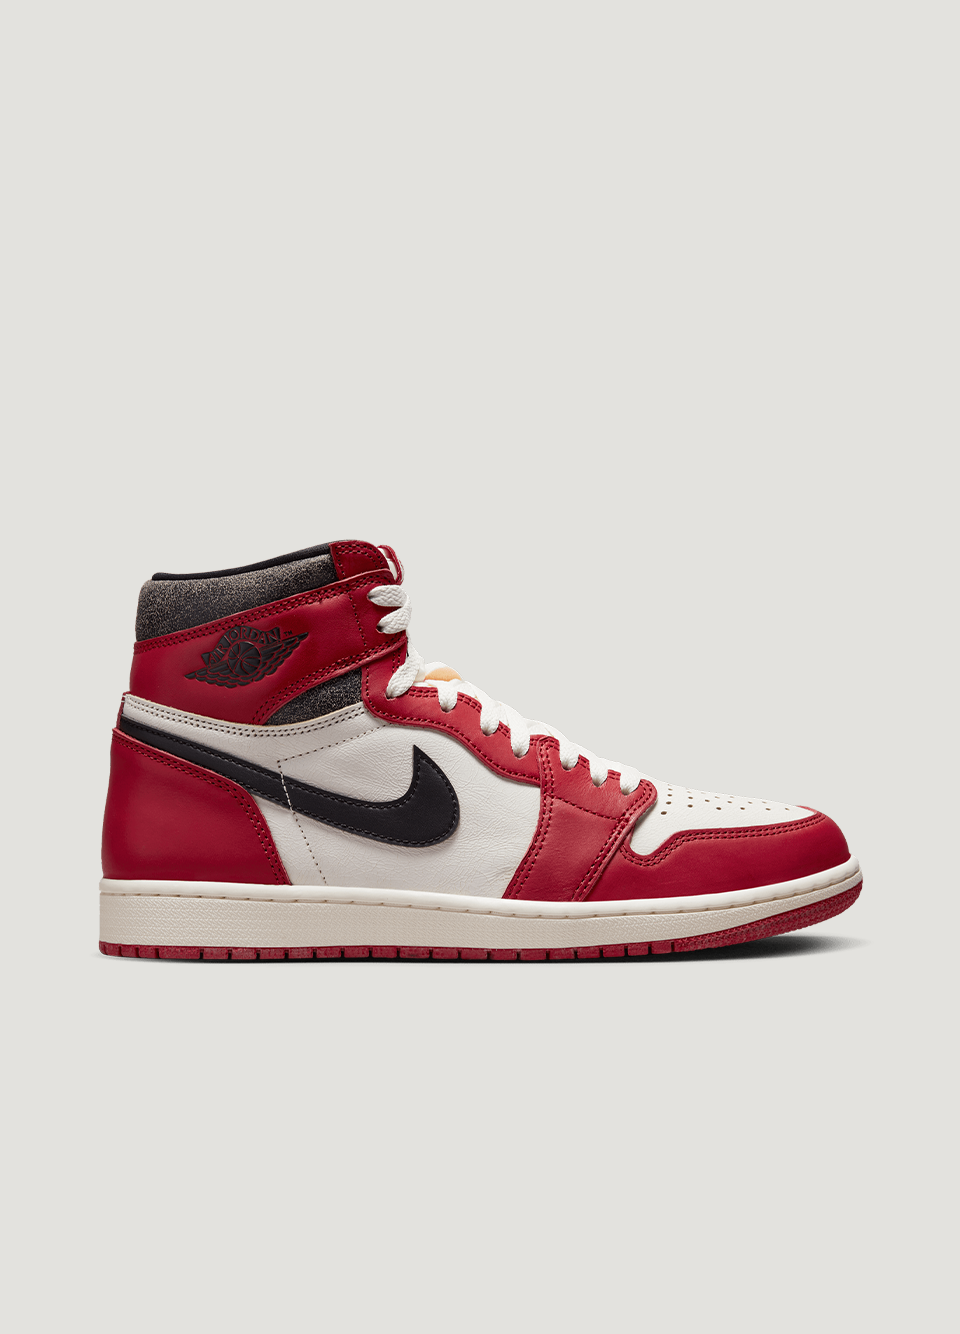 how much are the jordan 1 chicago